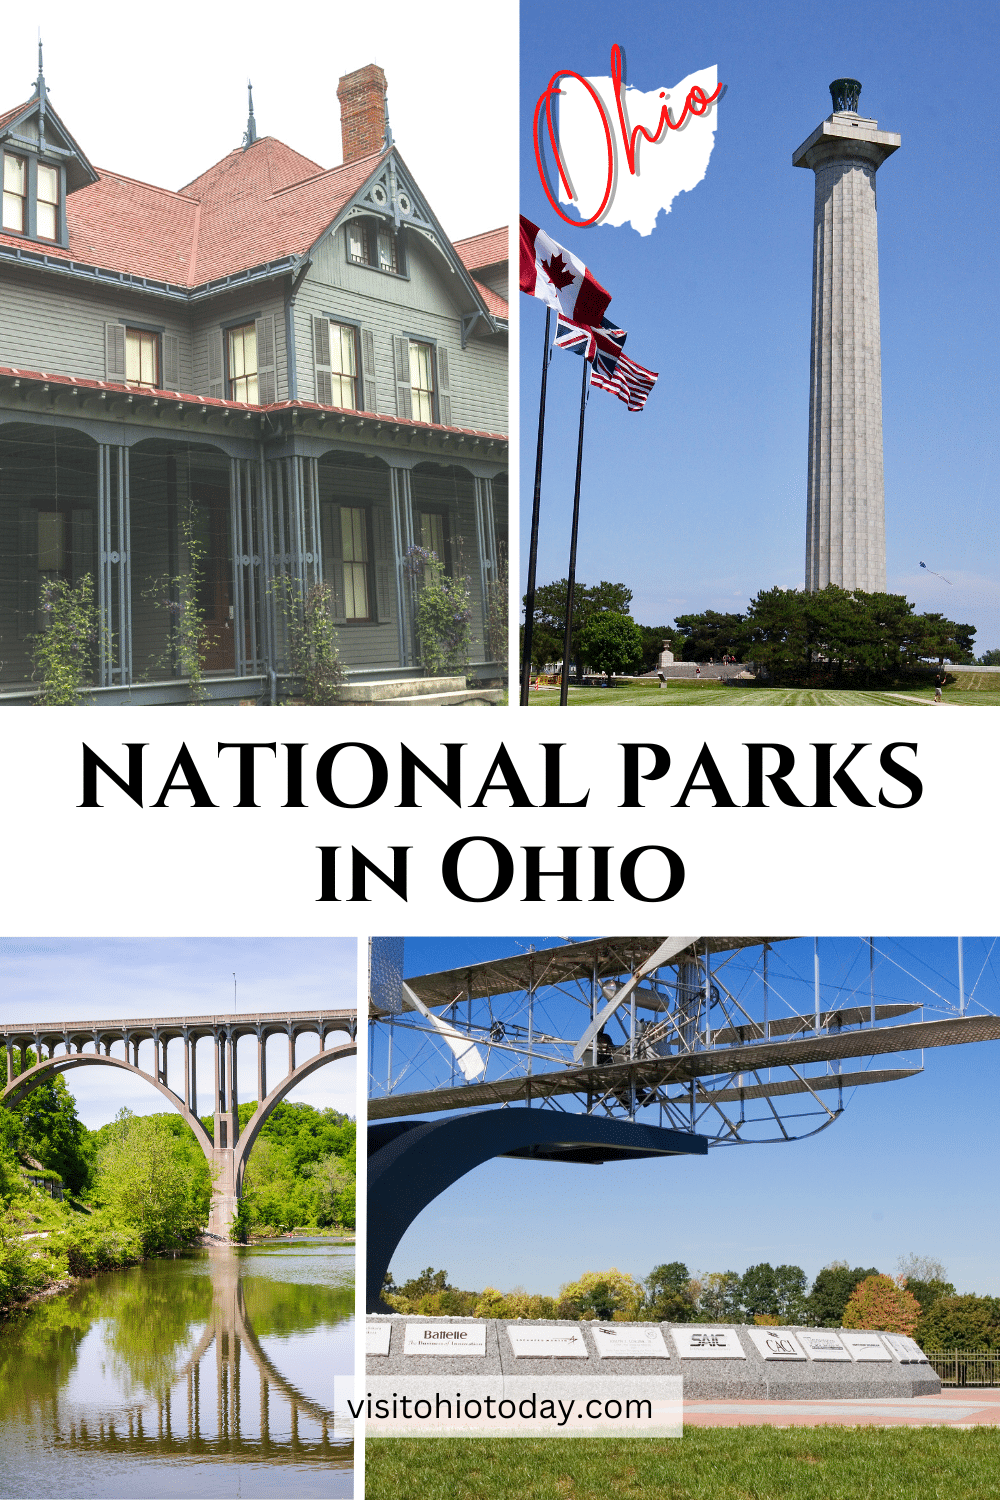 There are eight national parks in Ohio, including historic sites, parks, and memorials, managed by the National Parks System. In this article we give some information on all of them.